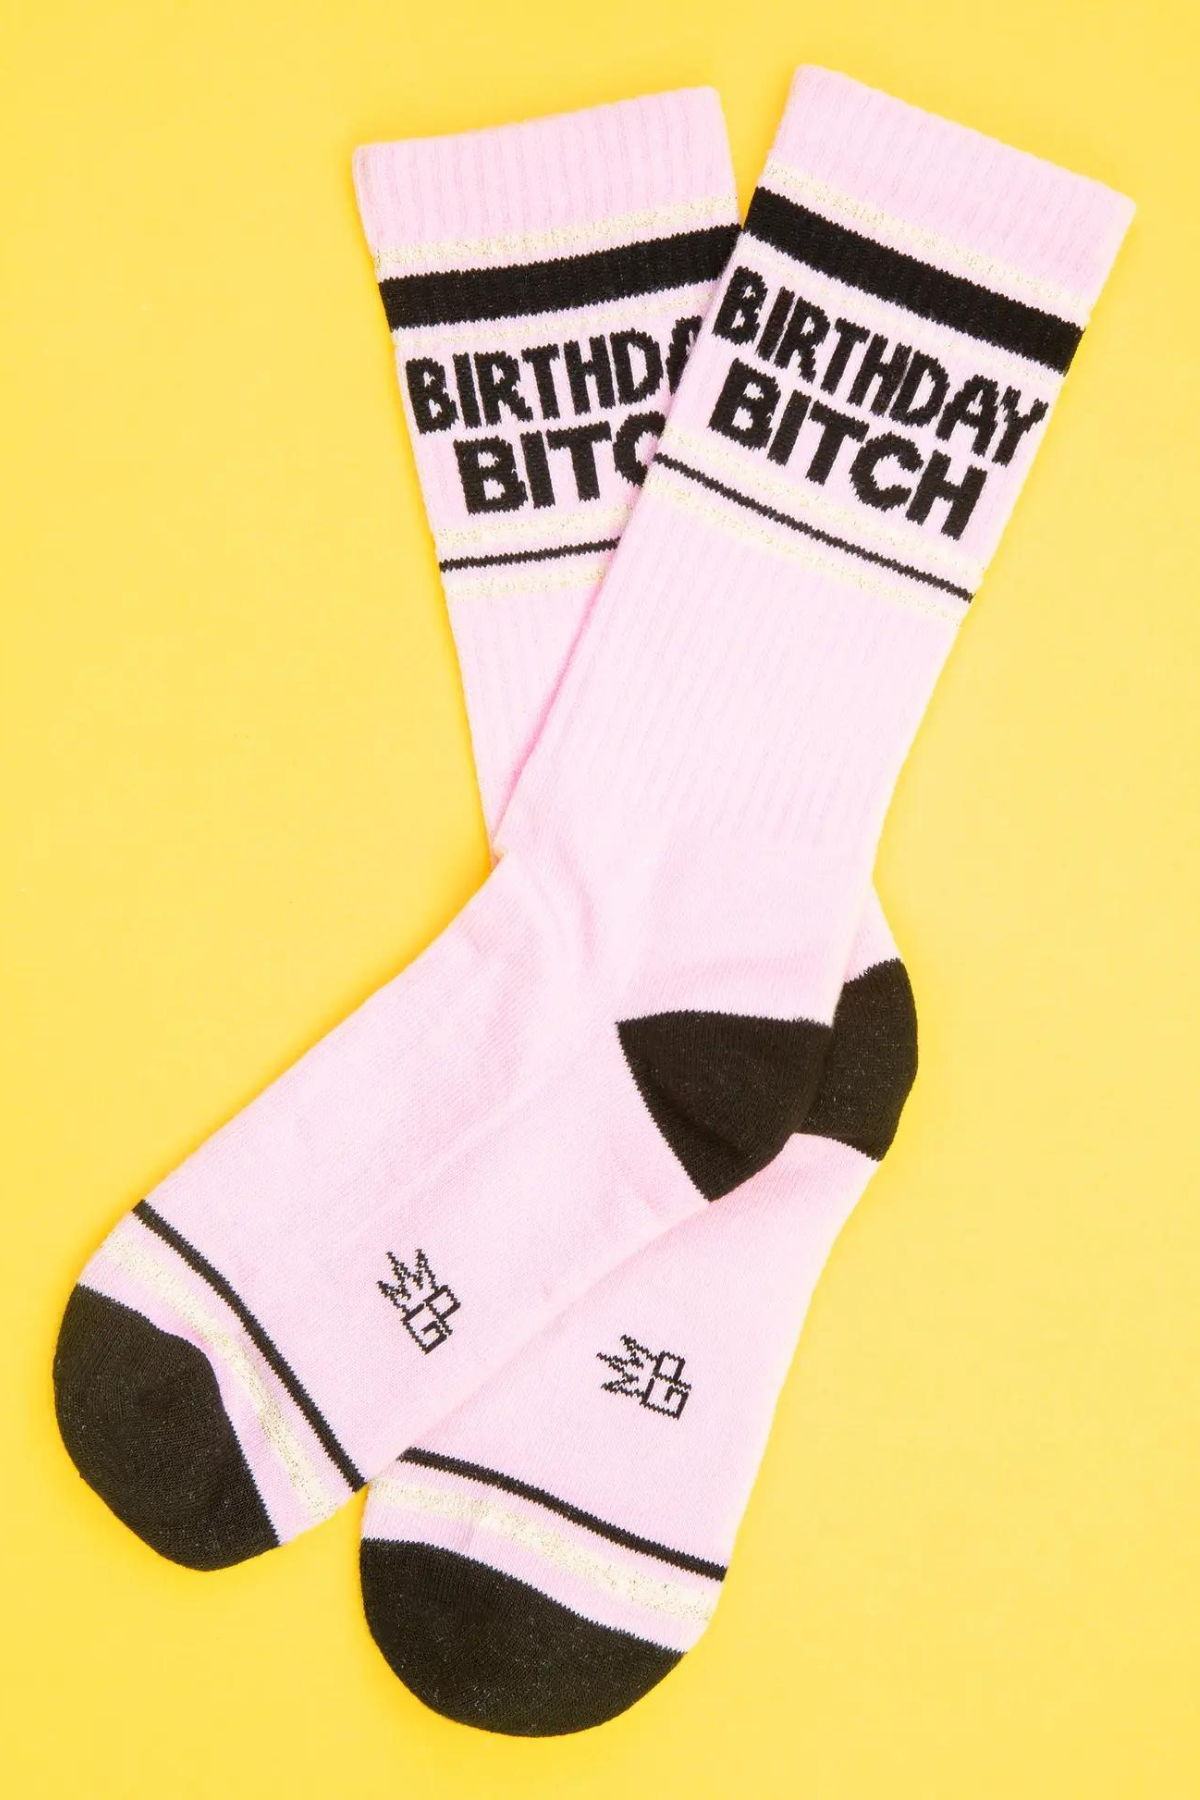 Birthday Bitch Socks, Essentials Acc by Gumball Poodle | LIT Boutique